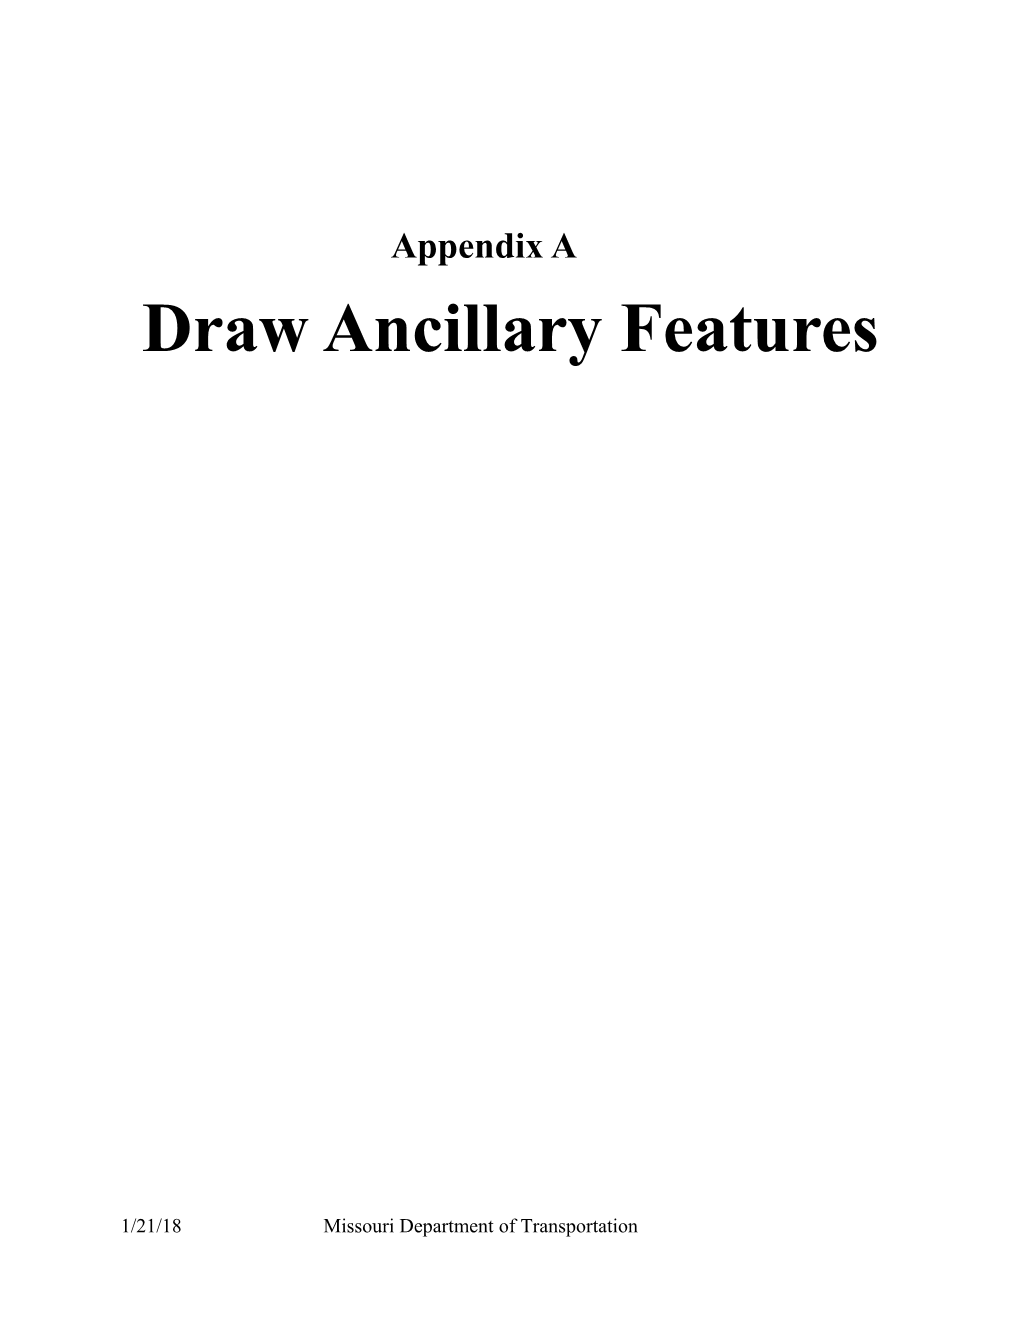 GEOPAK Road Appendix a - Draw Ancillary Features